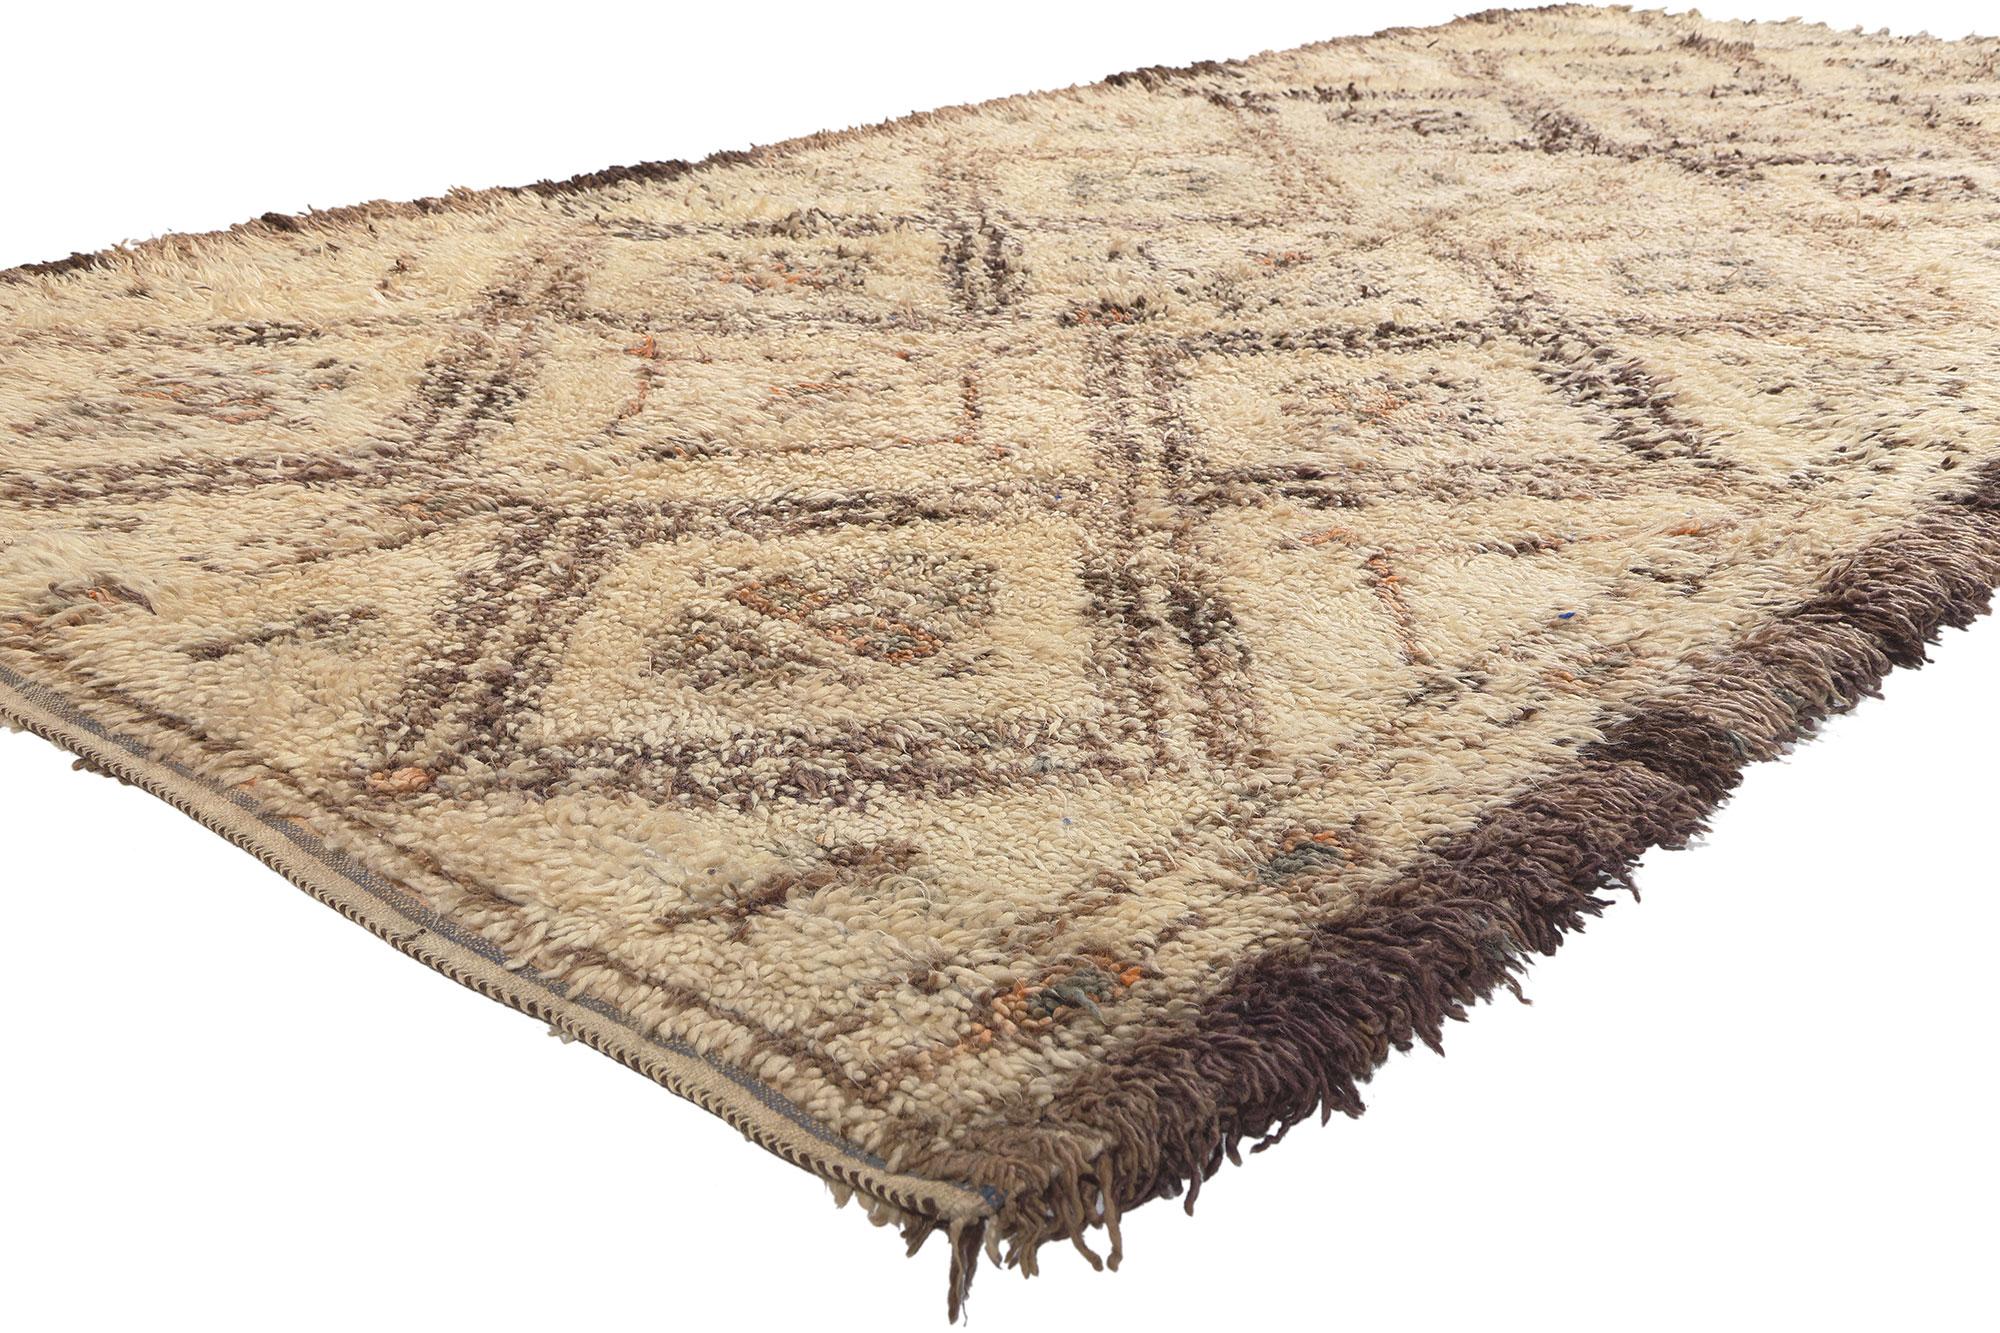 20661 Vintage Beni MGuild Moroccan Rug, 06'01 x 13'01. This hand knotted wool vintage Moroccan rug is a traditional handwoven masterpiece crafted by the Beni MGuild tribe, a subset of the Berber Tribe in Morocco. Known for their intricate designs,